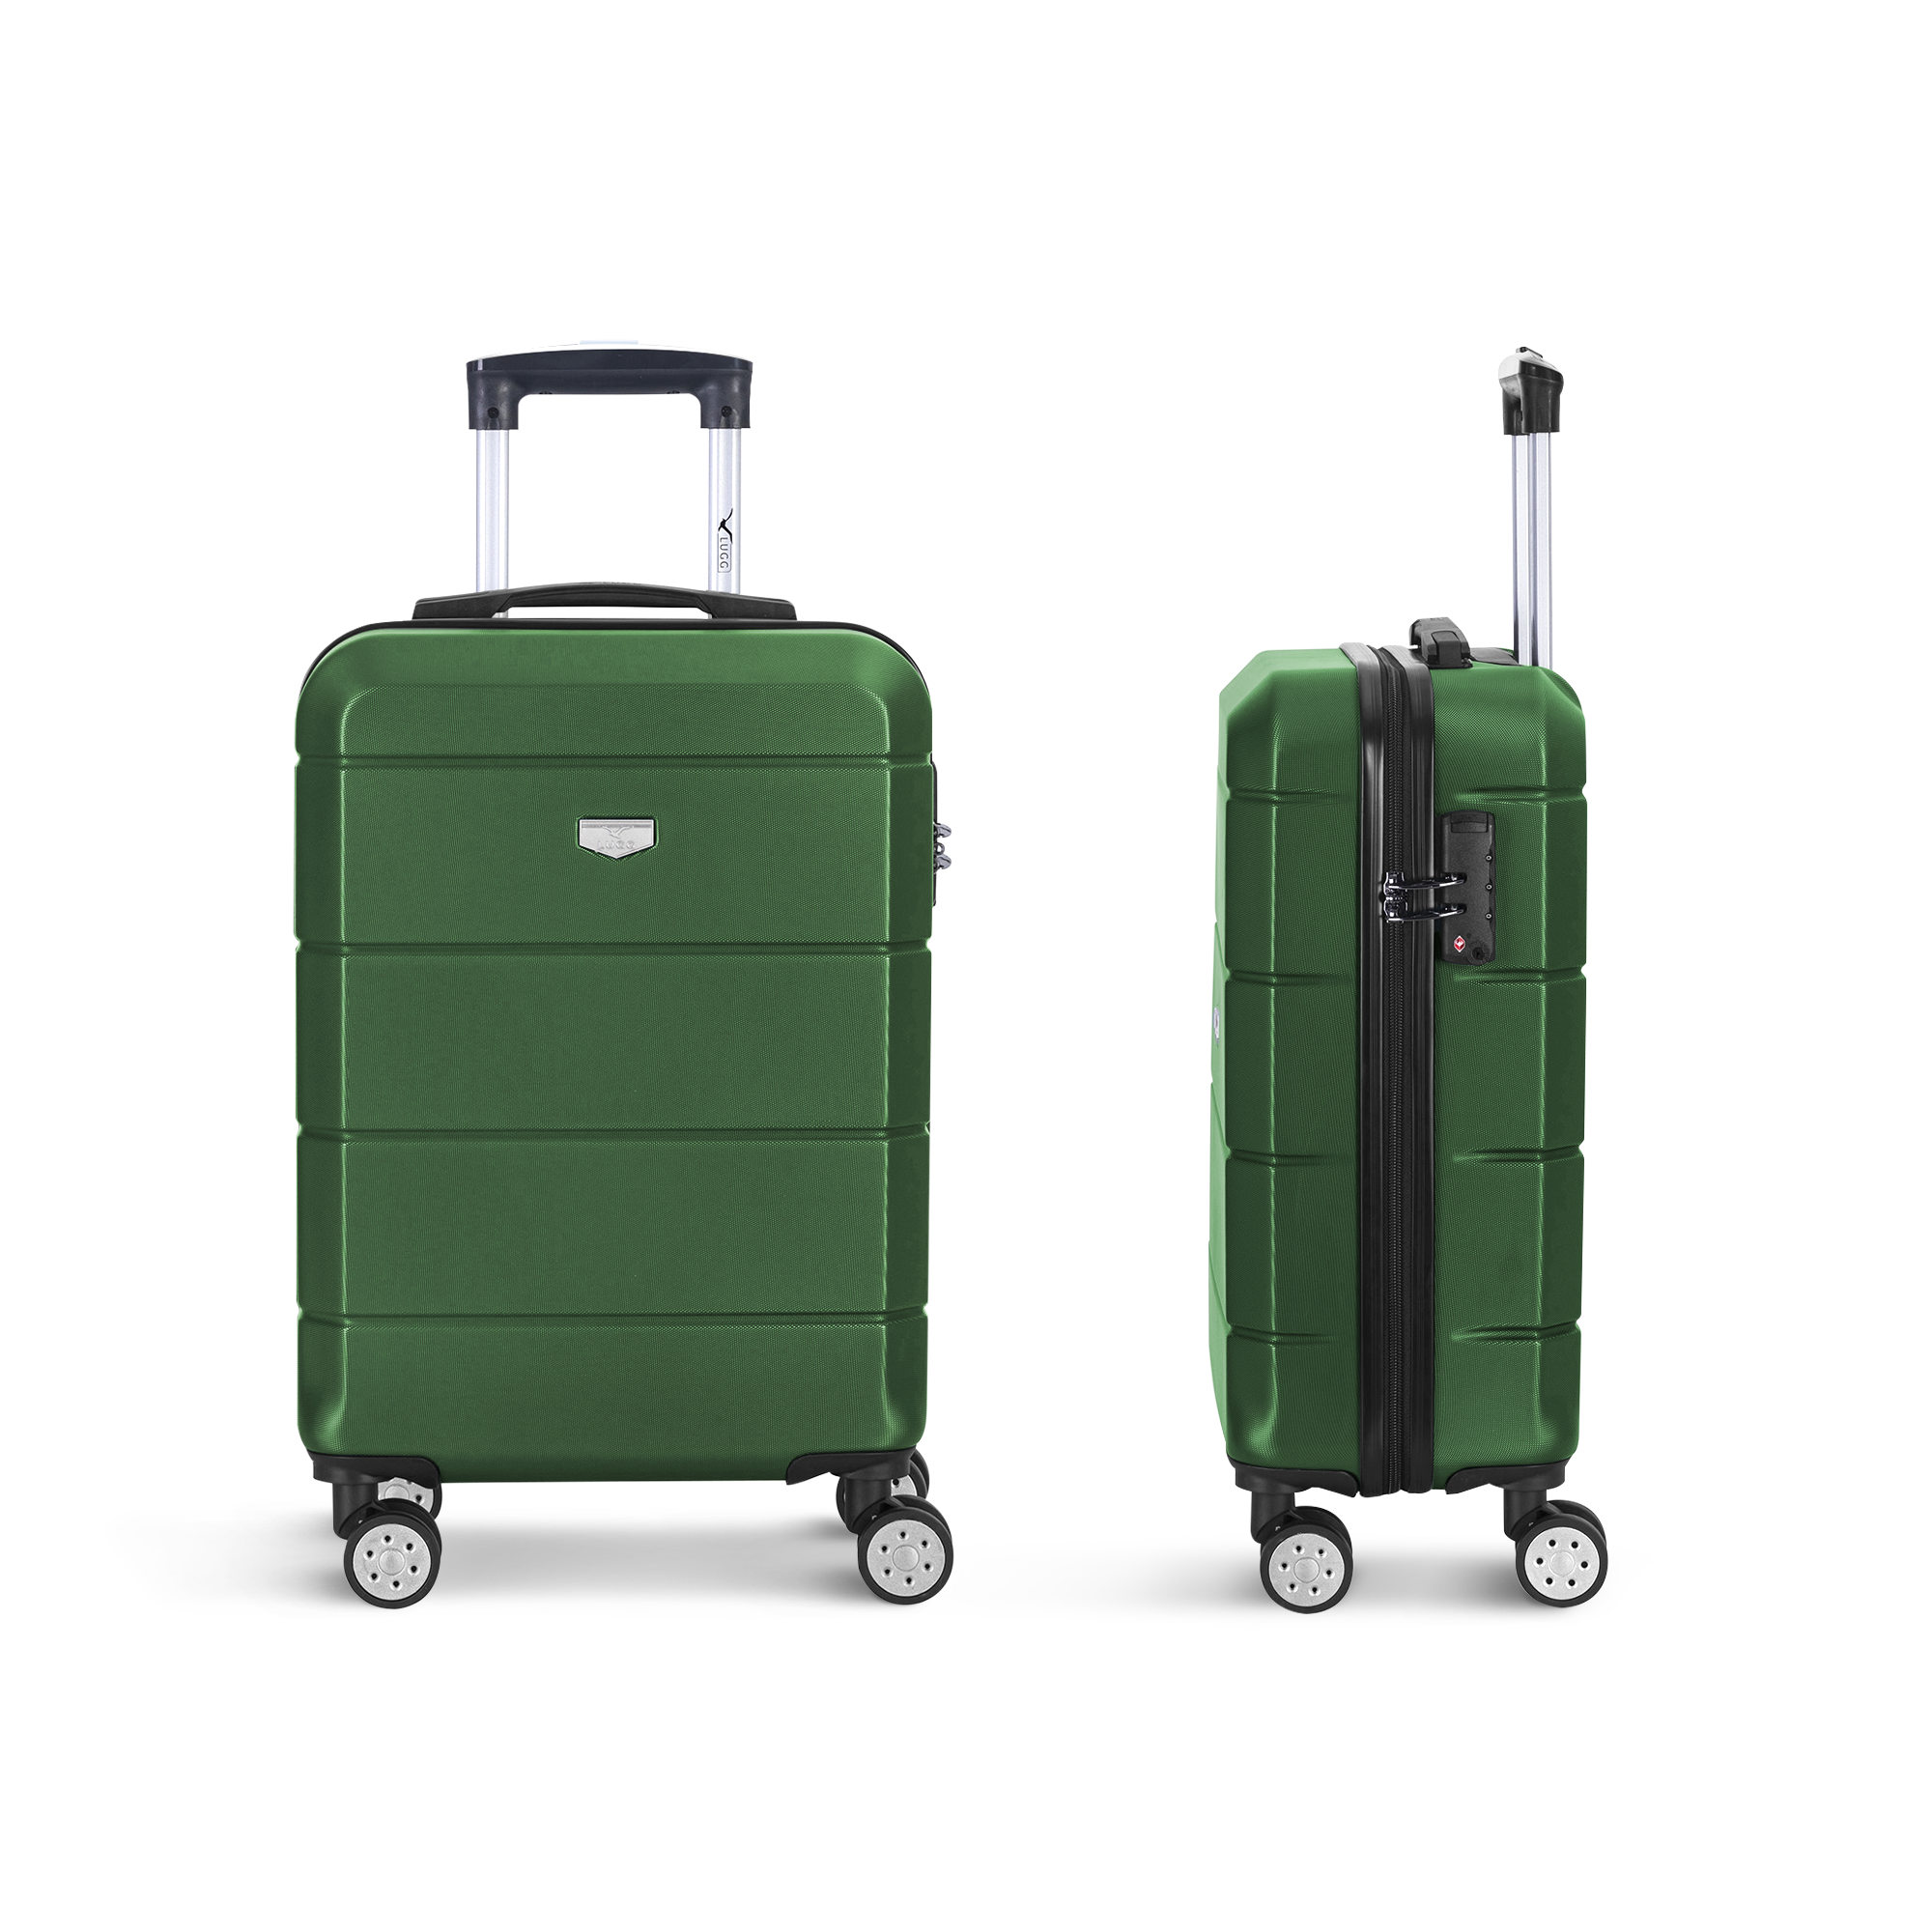 Jetset 20-inch Suitcase in Army Green